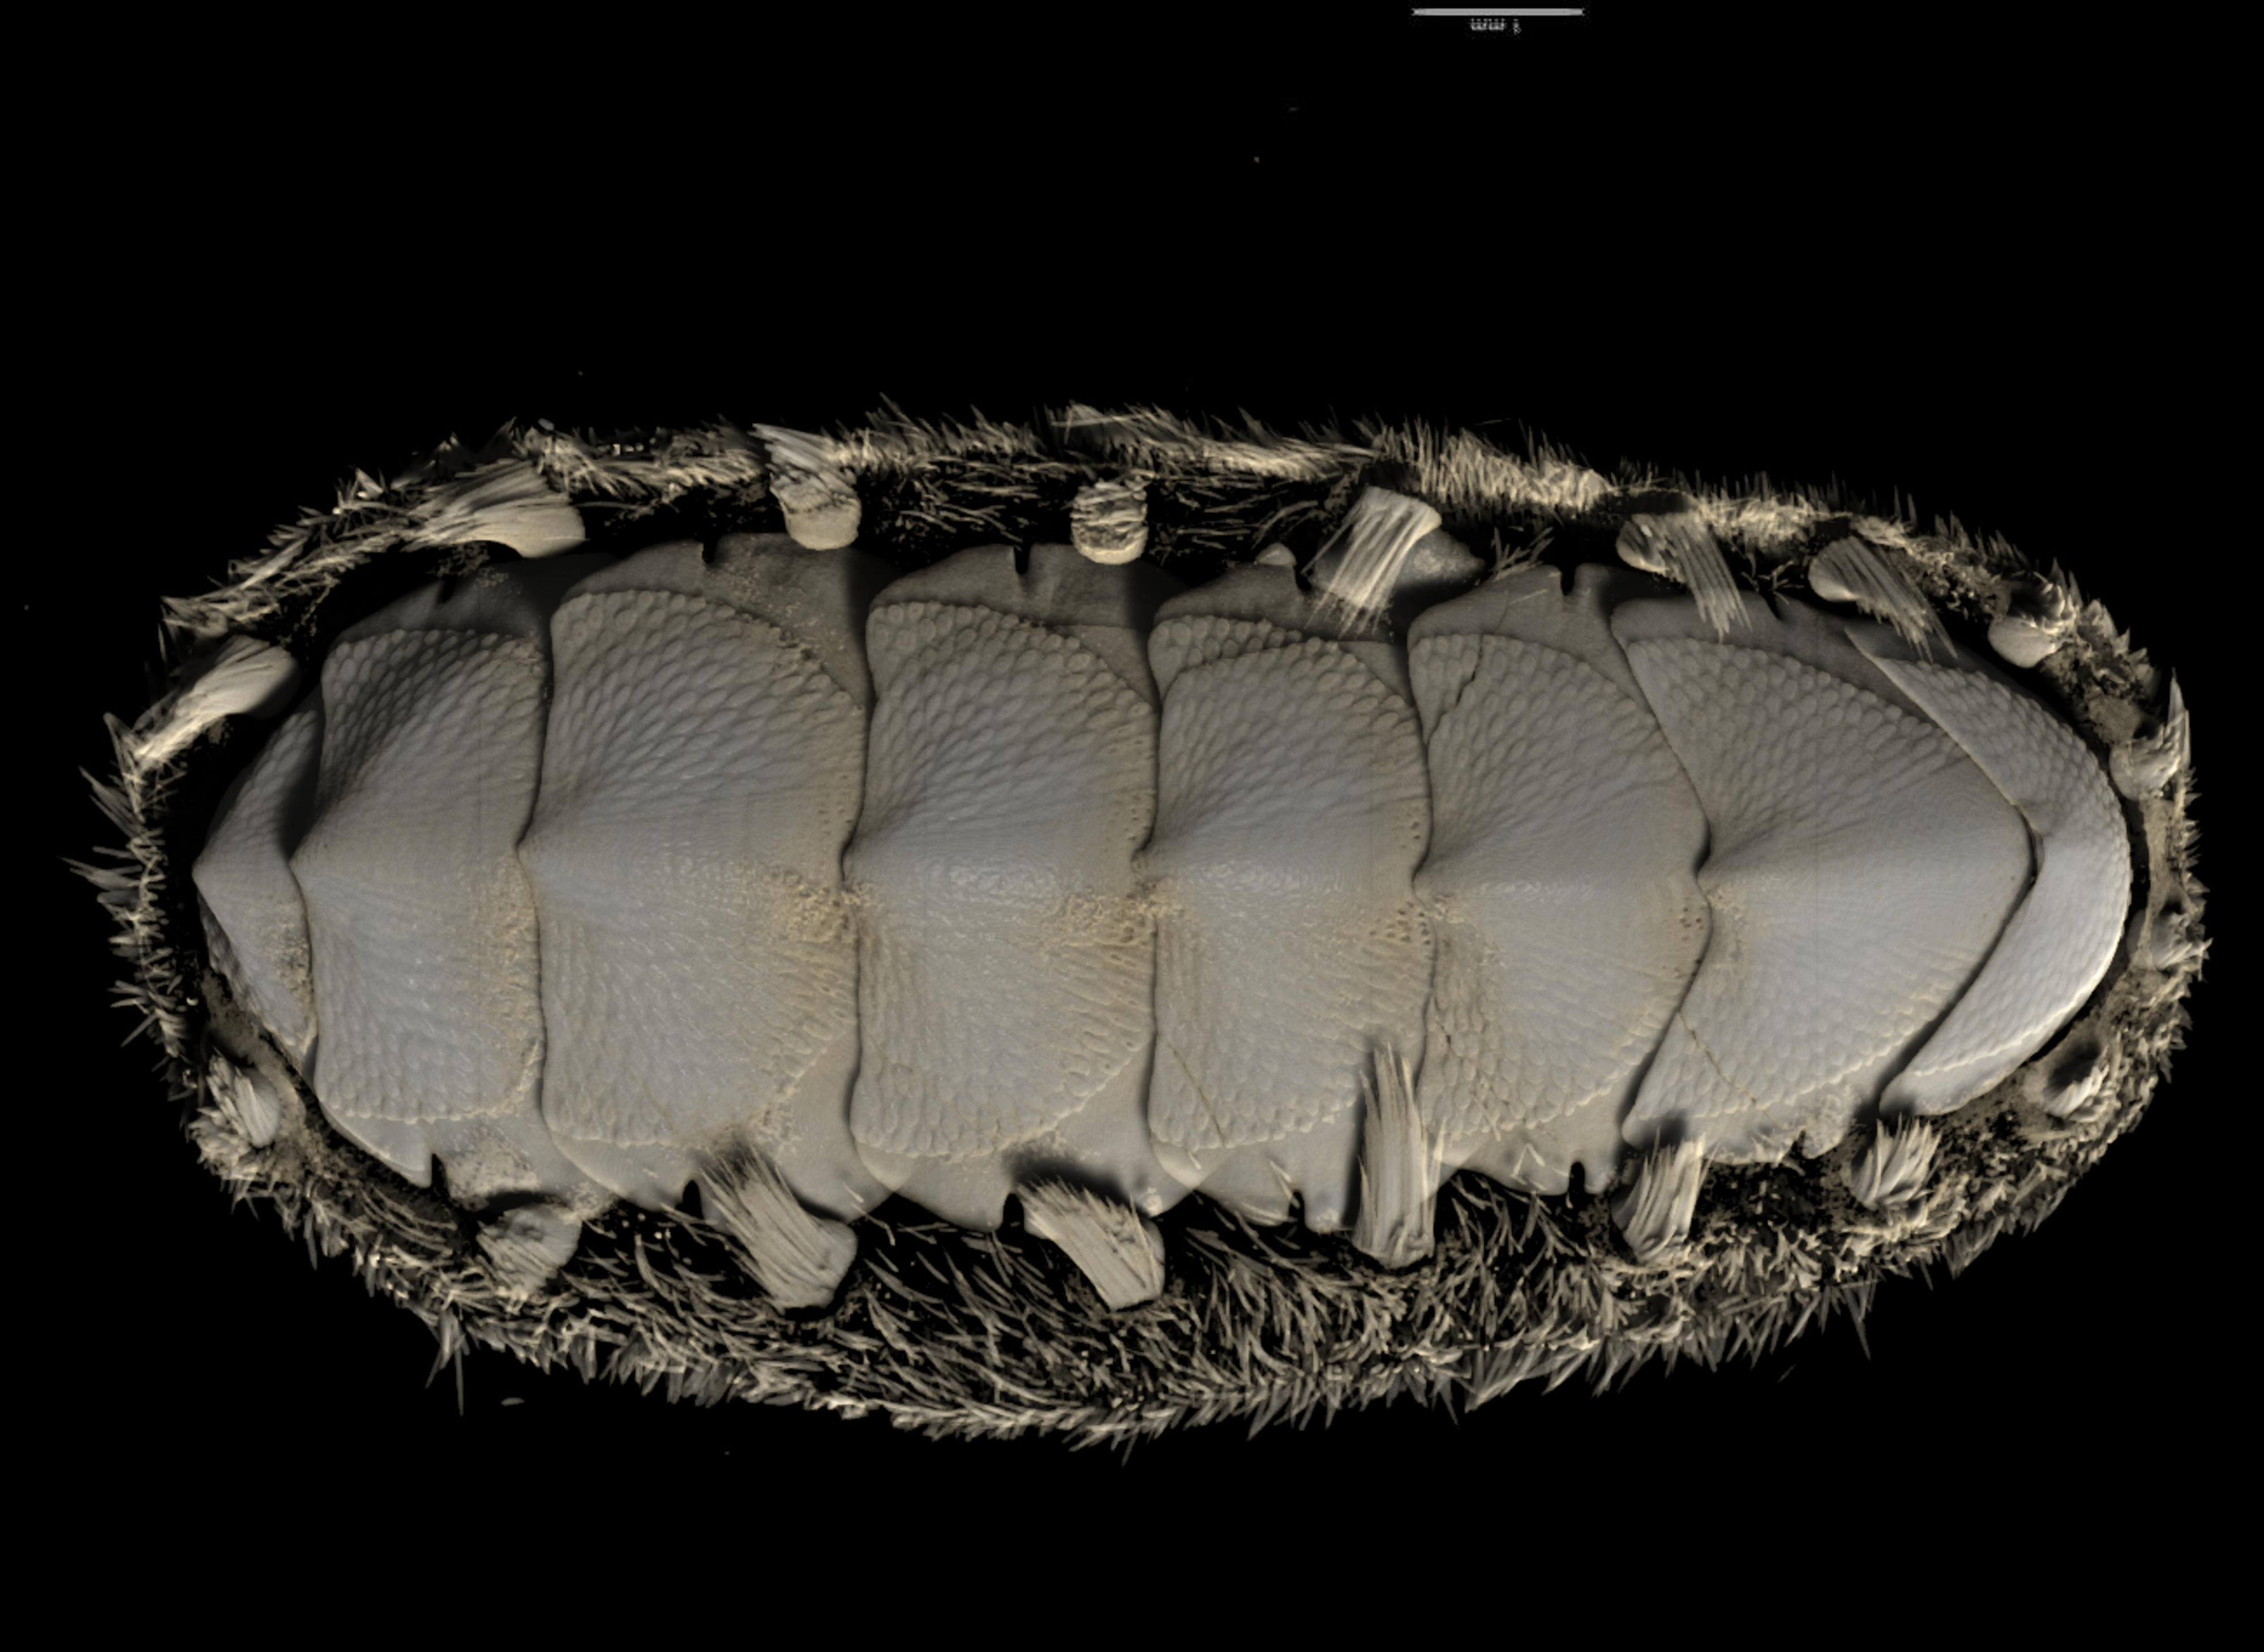 BE-RBINS-INV HOLOTYPE MT.3783 Acanthochiton oblongus MICROCT XRE DORSAL.jpg